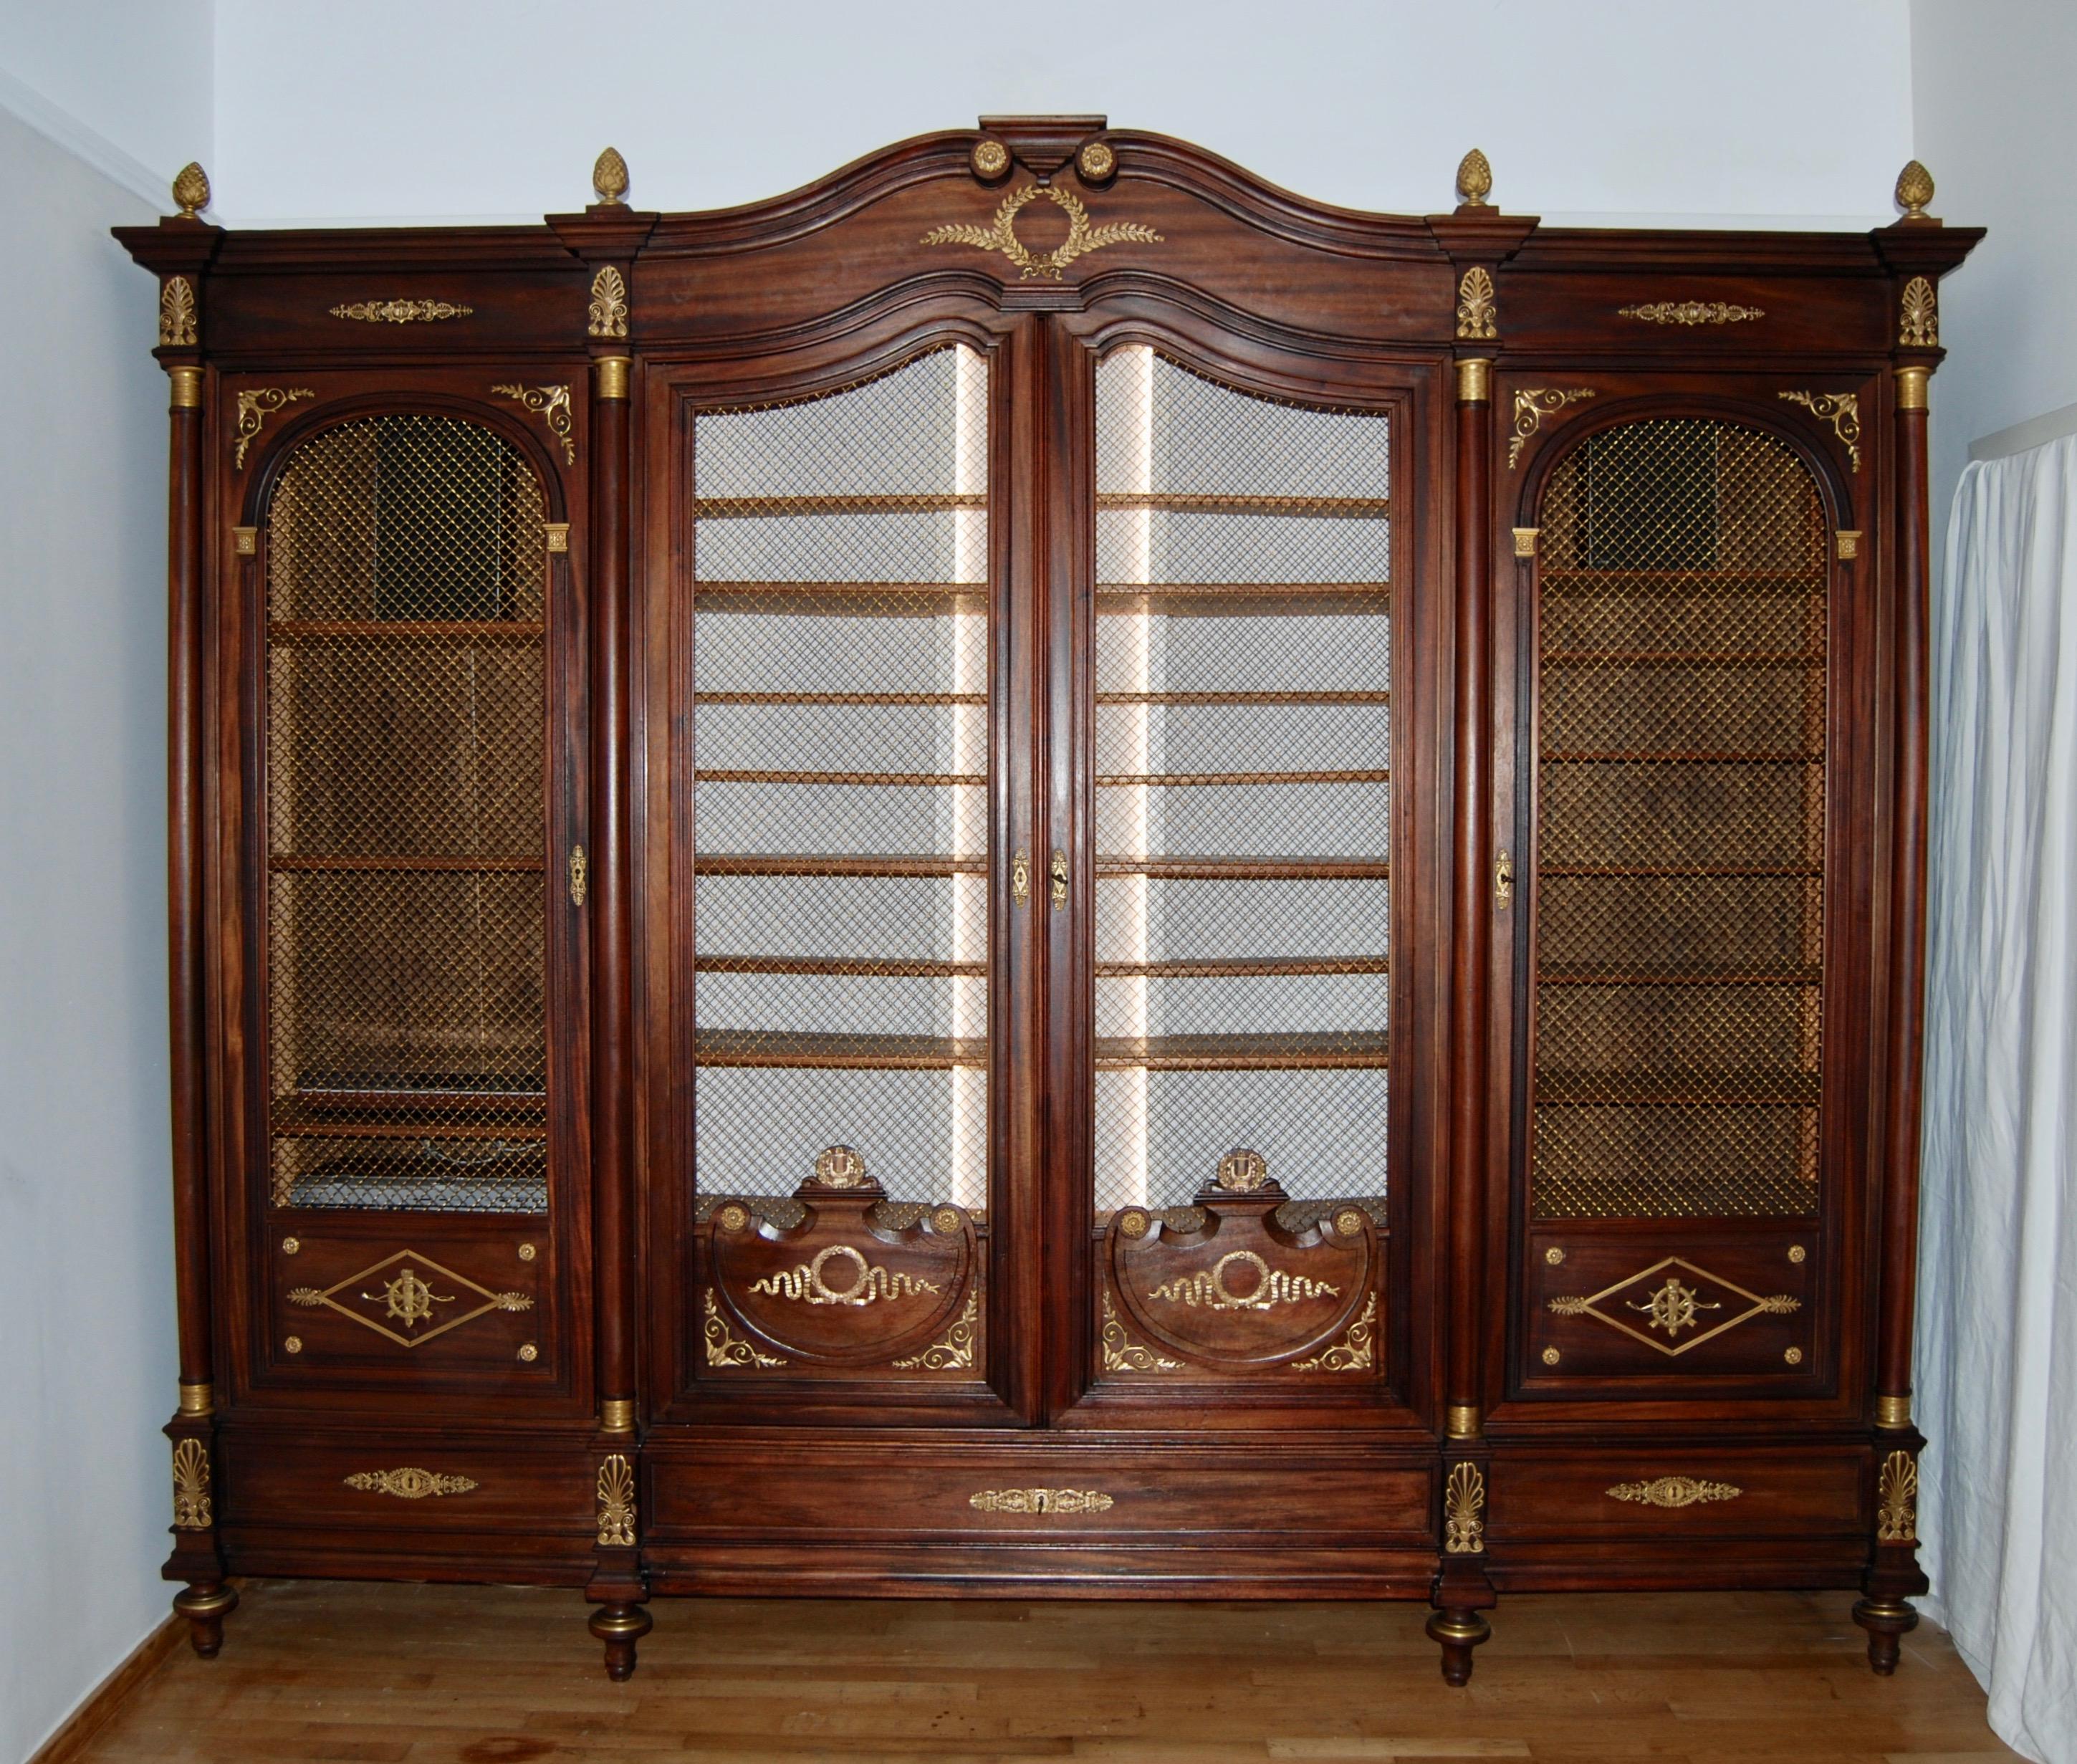 This magnificent series of cupboards has 4 locking doors and a large central drawer.
The upper part of the doors are in gilded bronze mesh with a mahogany panel at the base decorated with gilded bronze details.
This beautiful piece is richly